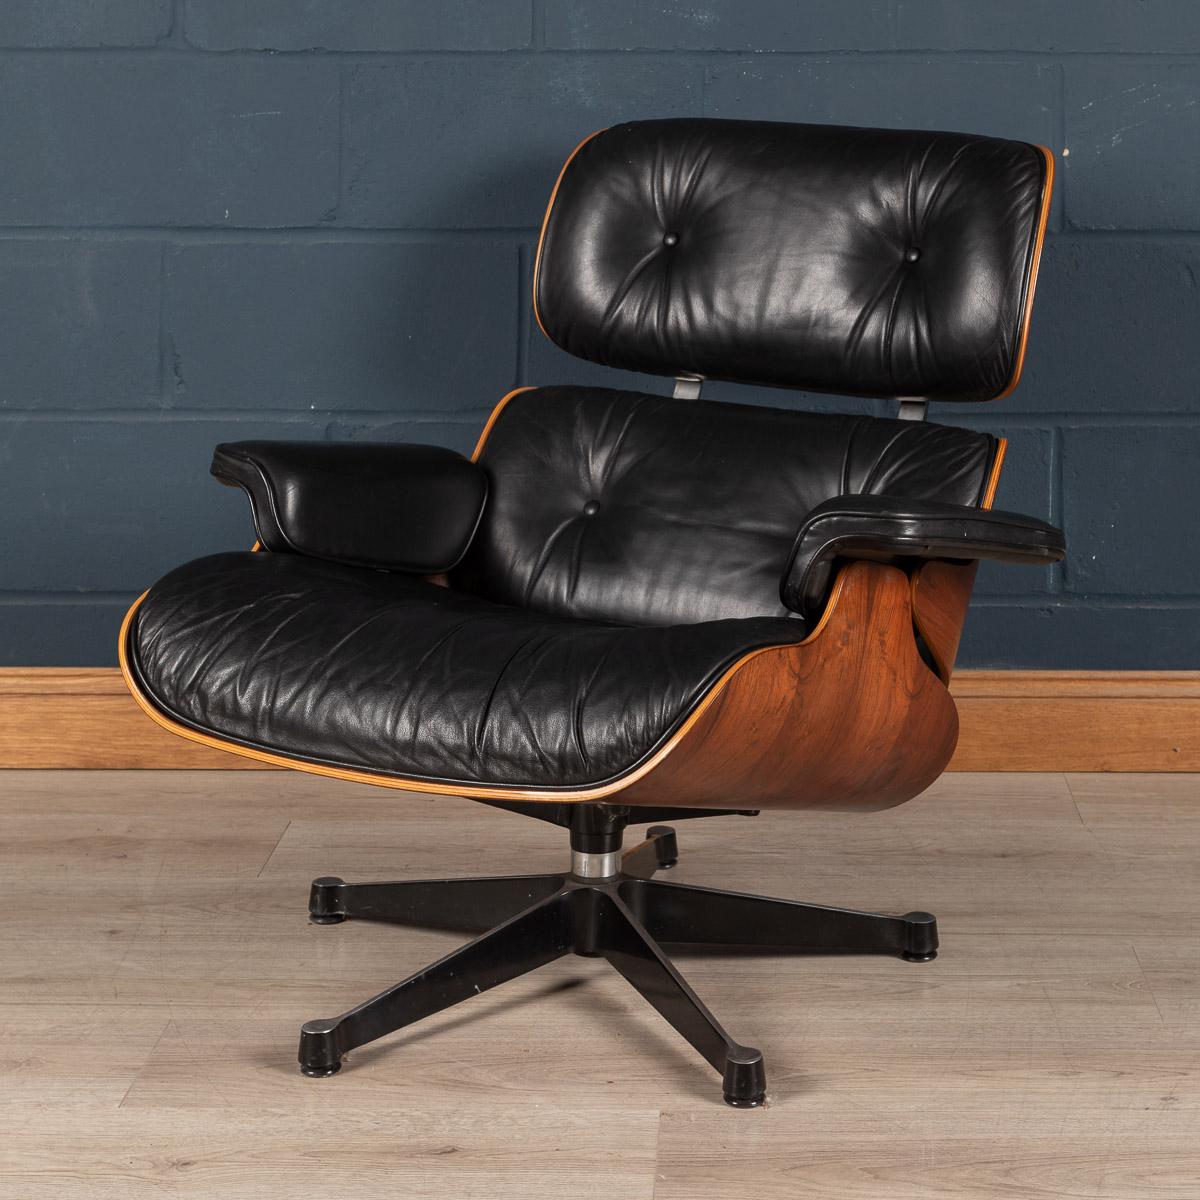 The Eames lounge chair was made of molded plywood and leather, designed by Charles and Ray Eames for the Herman Miller furniture company. The chair was officially titled Eames Lounge 